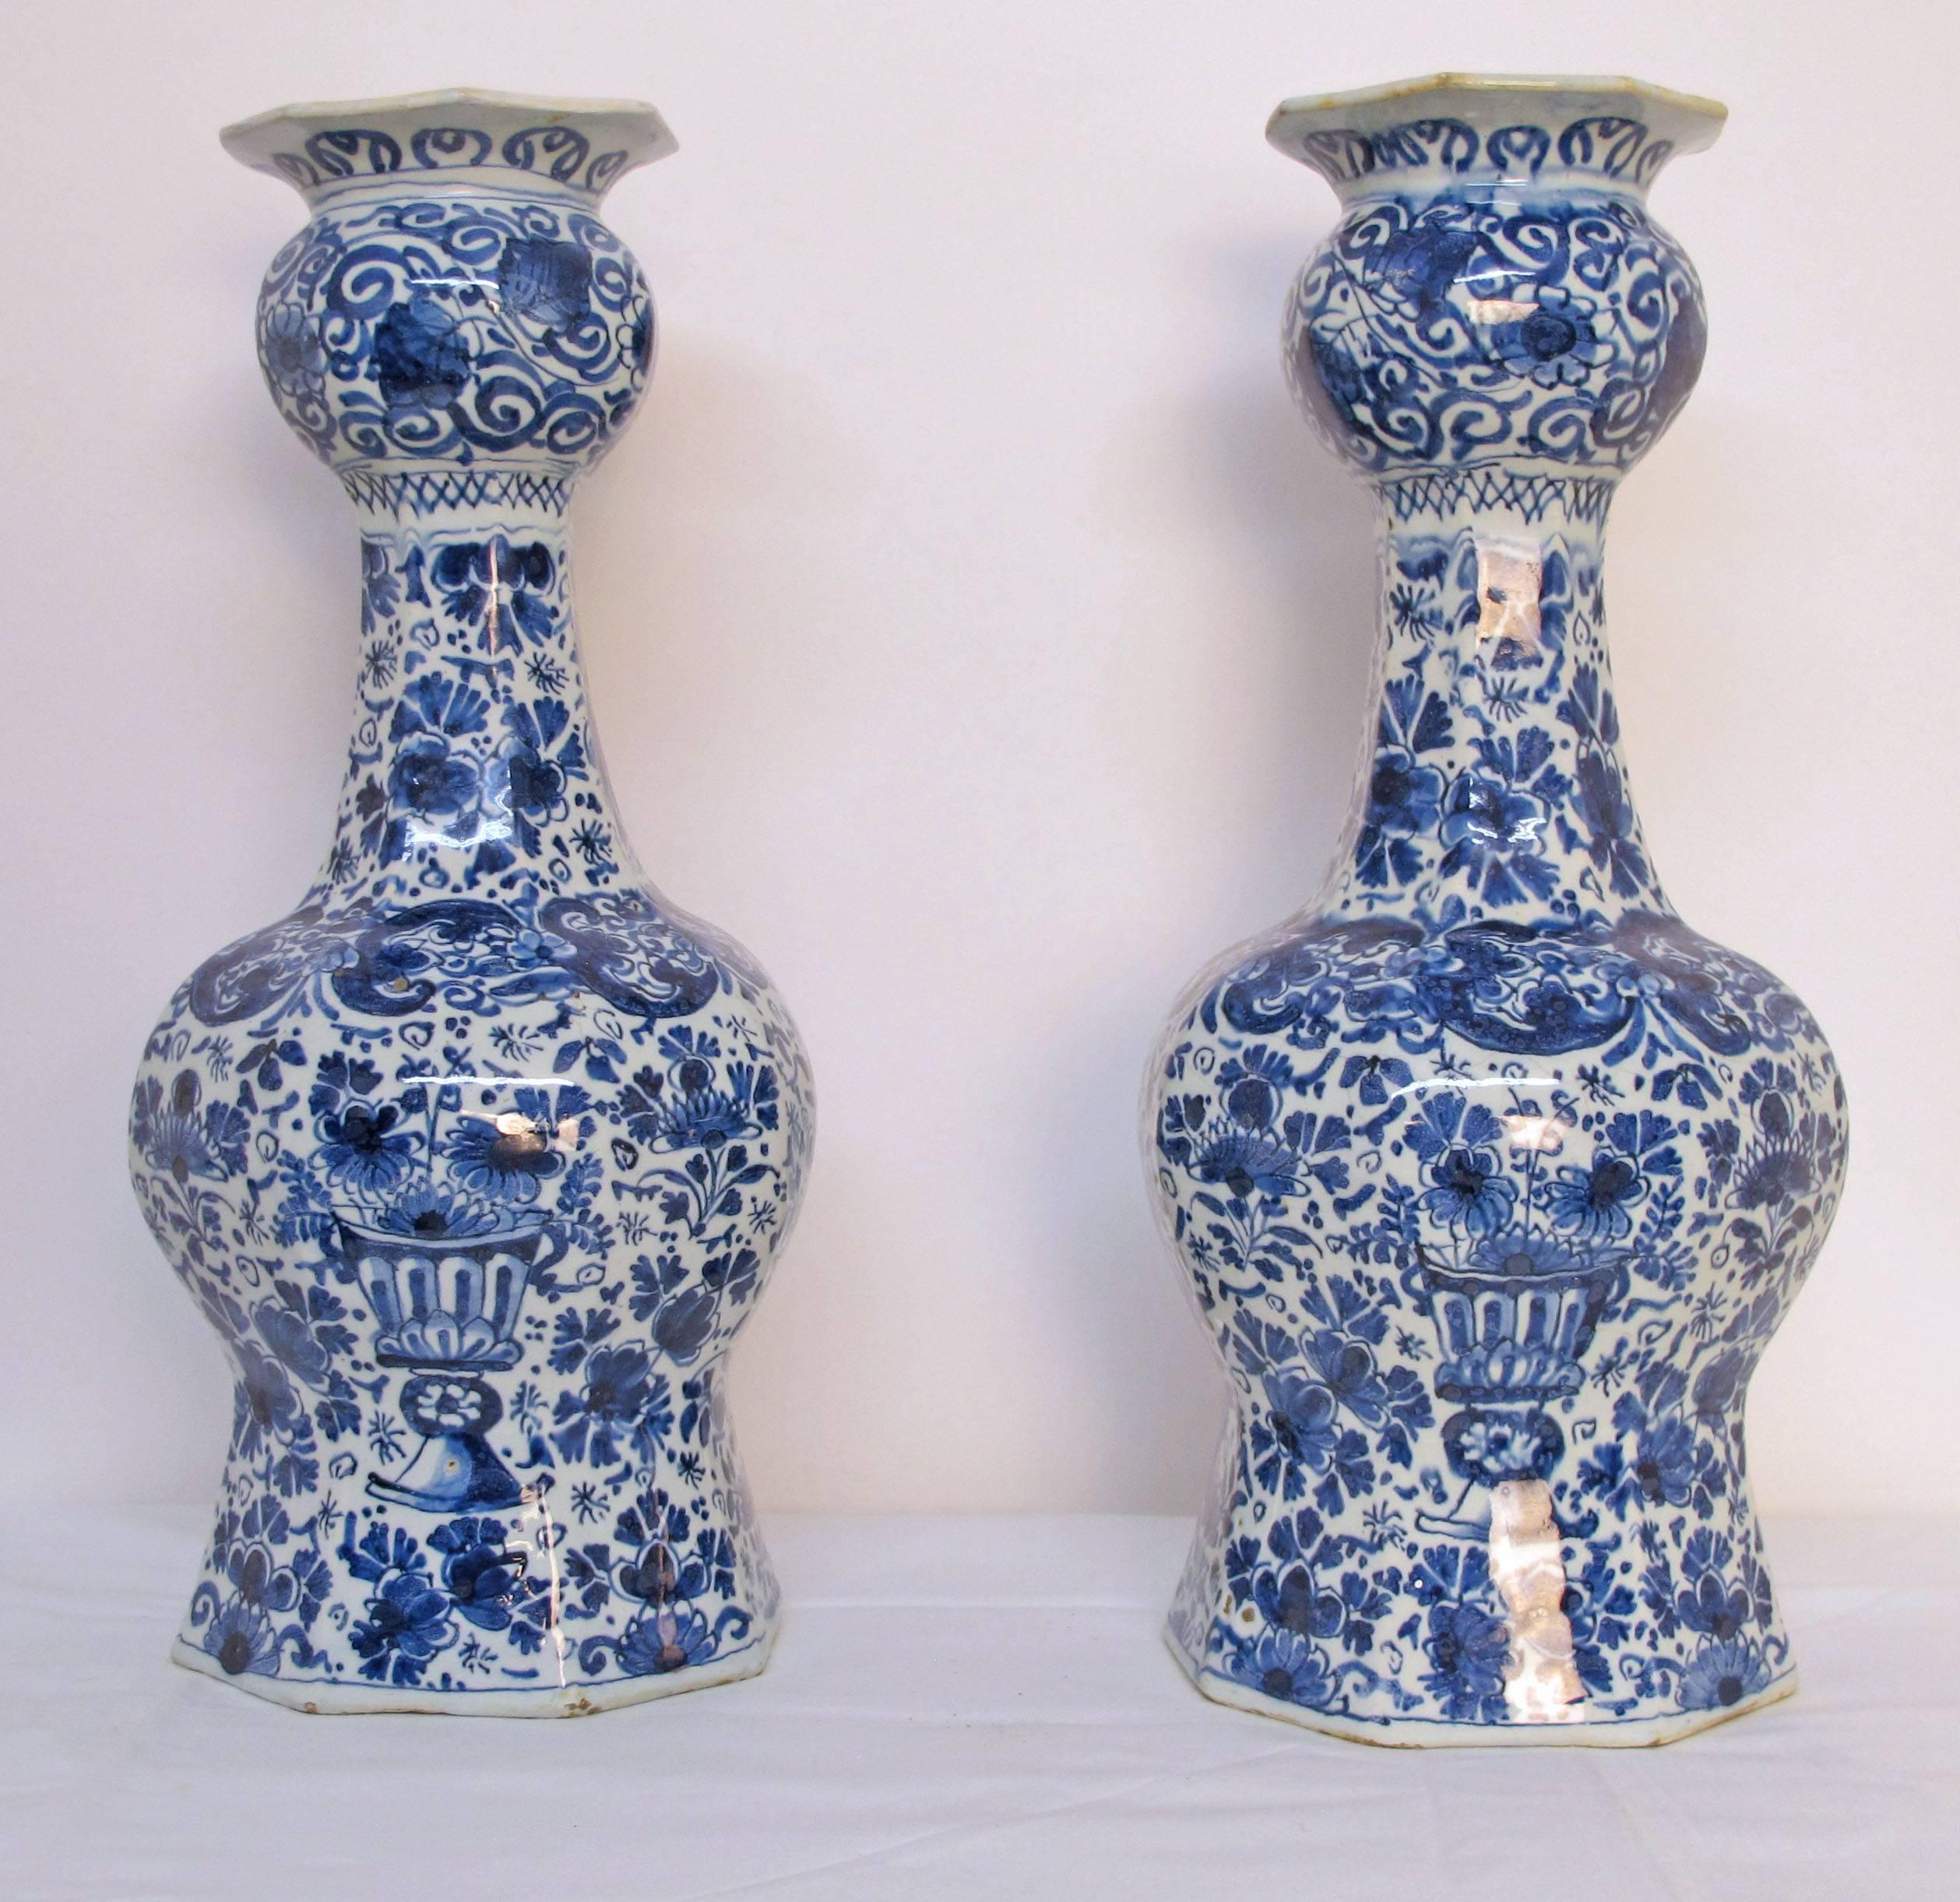 A pair of hexagonal shapedl blue and white tin glazed faience pottery vases with hand painted blue and white flowers and scrolling vines.  Holland, 18th. Century.  Some restoration to the rim of each vase.